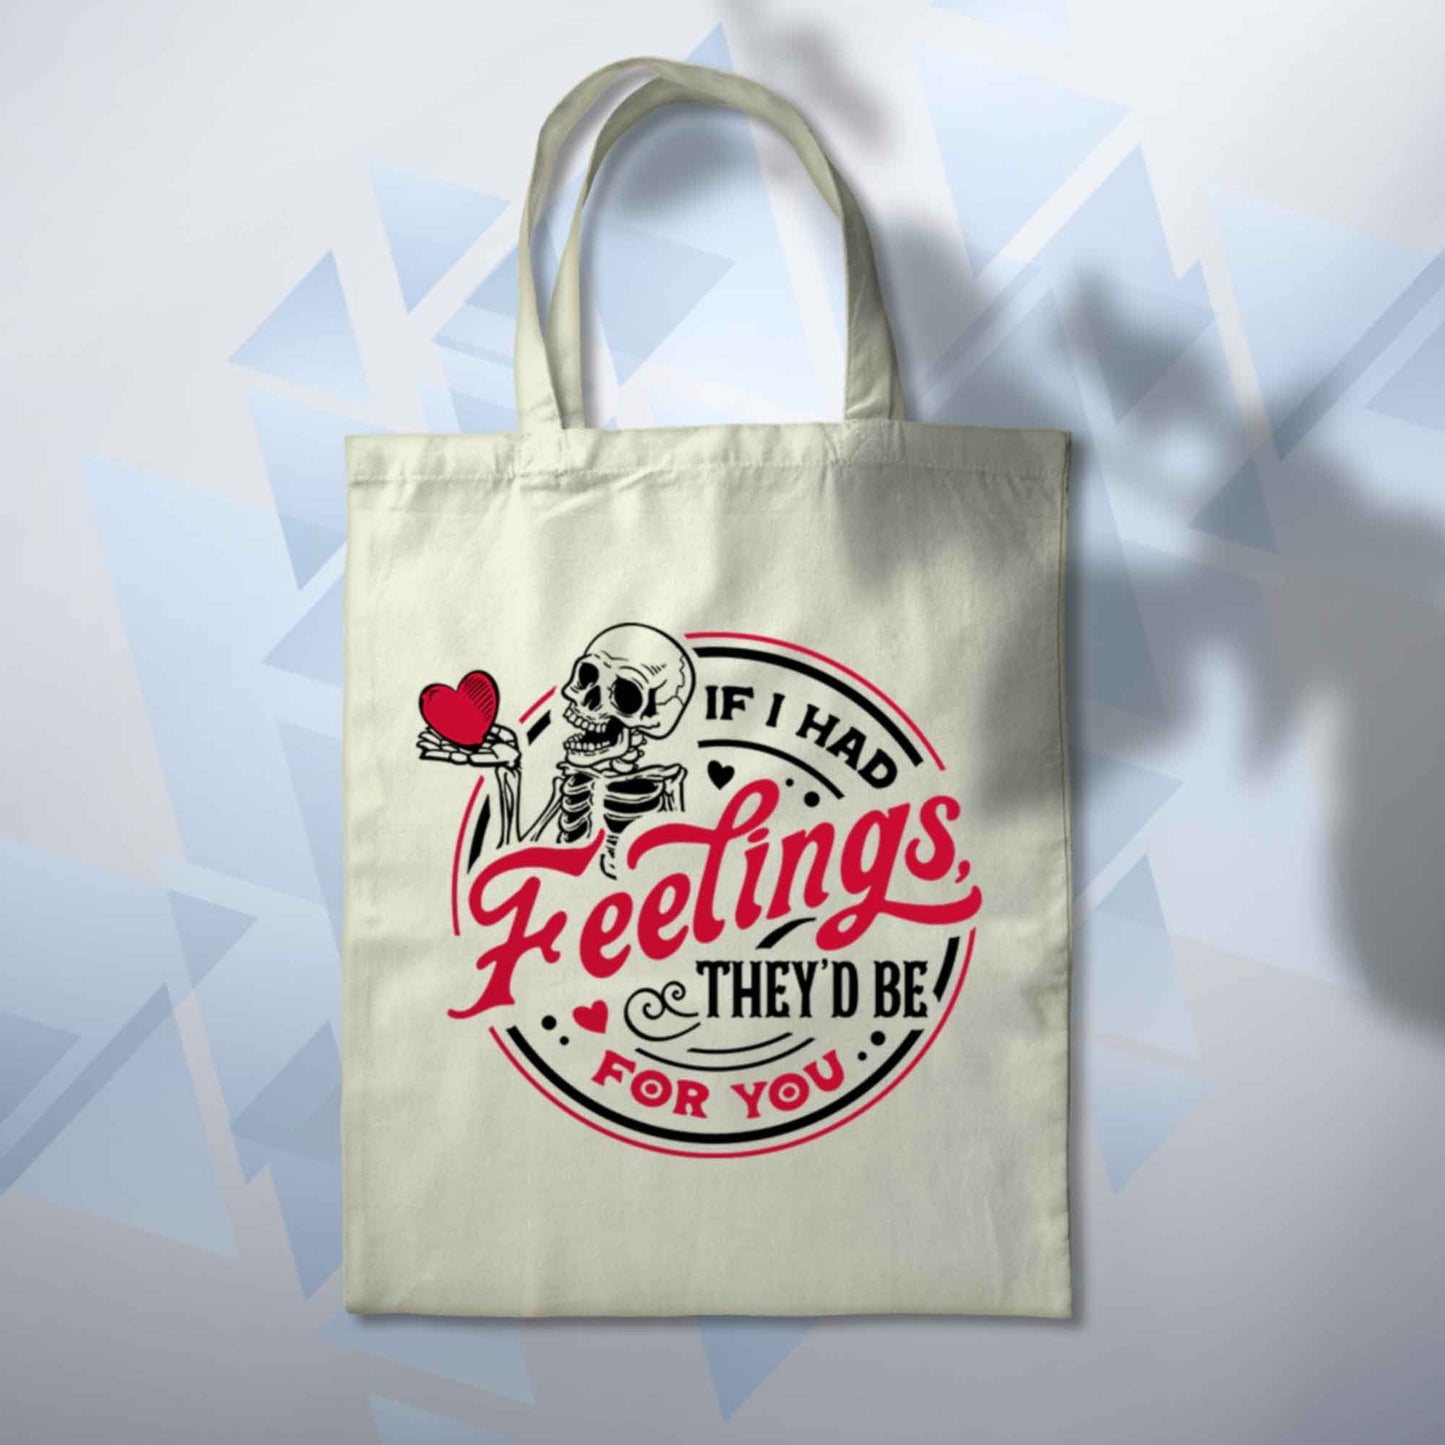 If I Had Feelings They'd Be For You Tote Bag 10L Bag